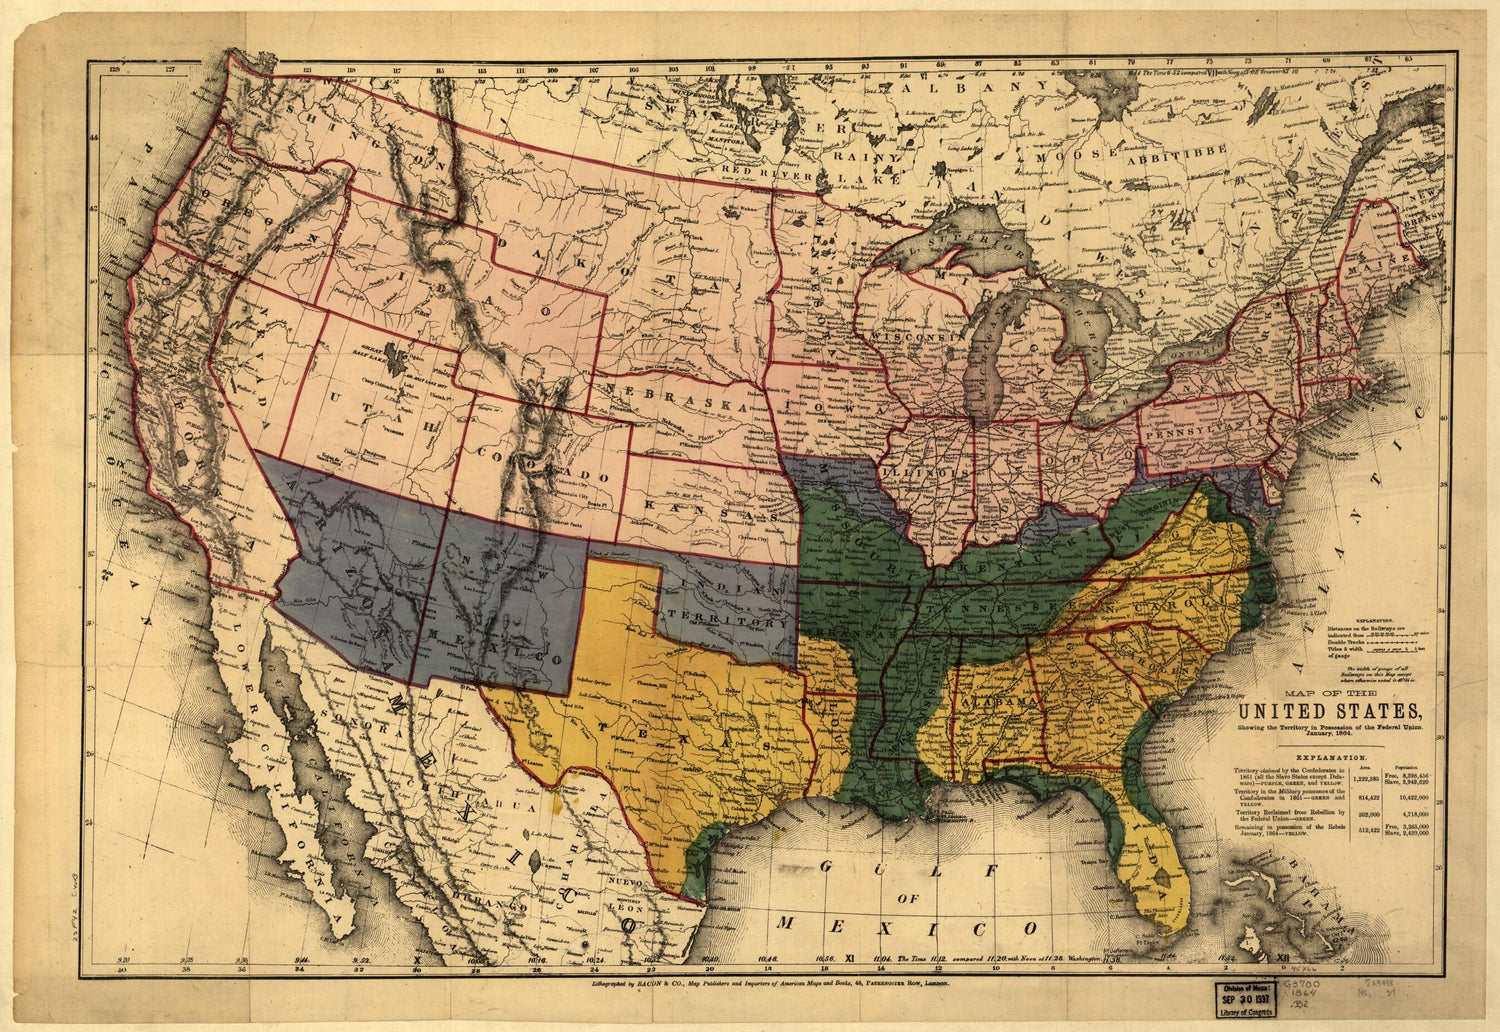 This old map of Map of the United States, Showing the Territory In Possession of the Federal Union, January, from 1864 was created by  Bacon &amp; Co in 1864